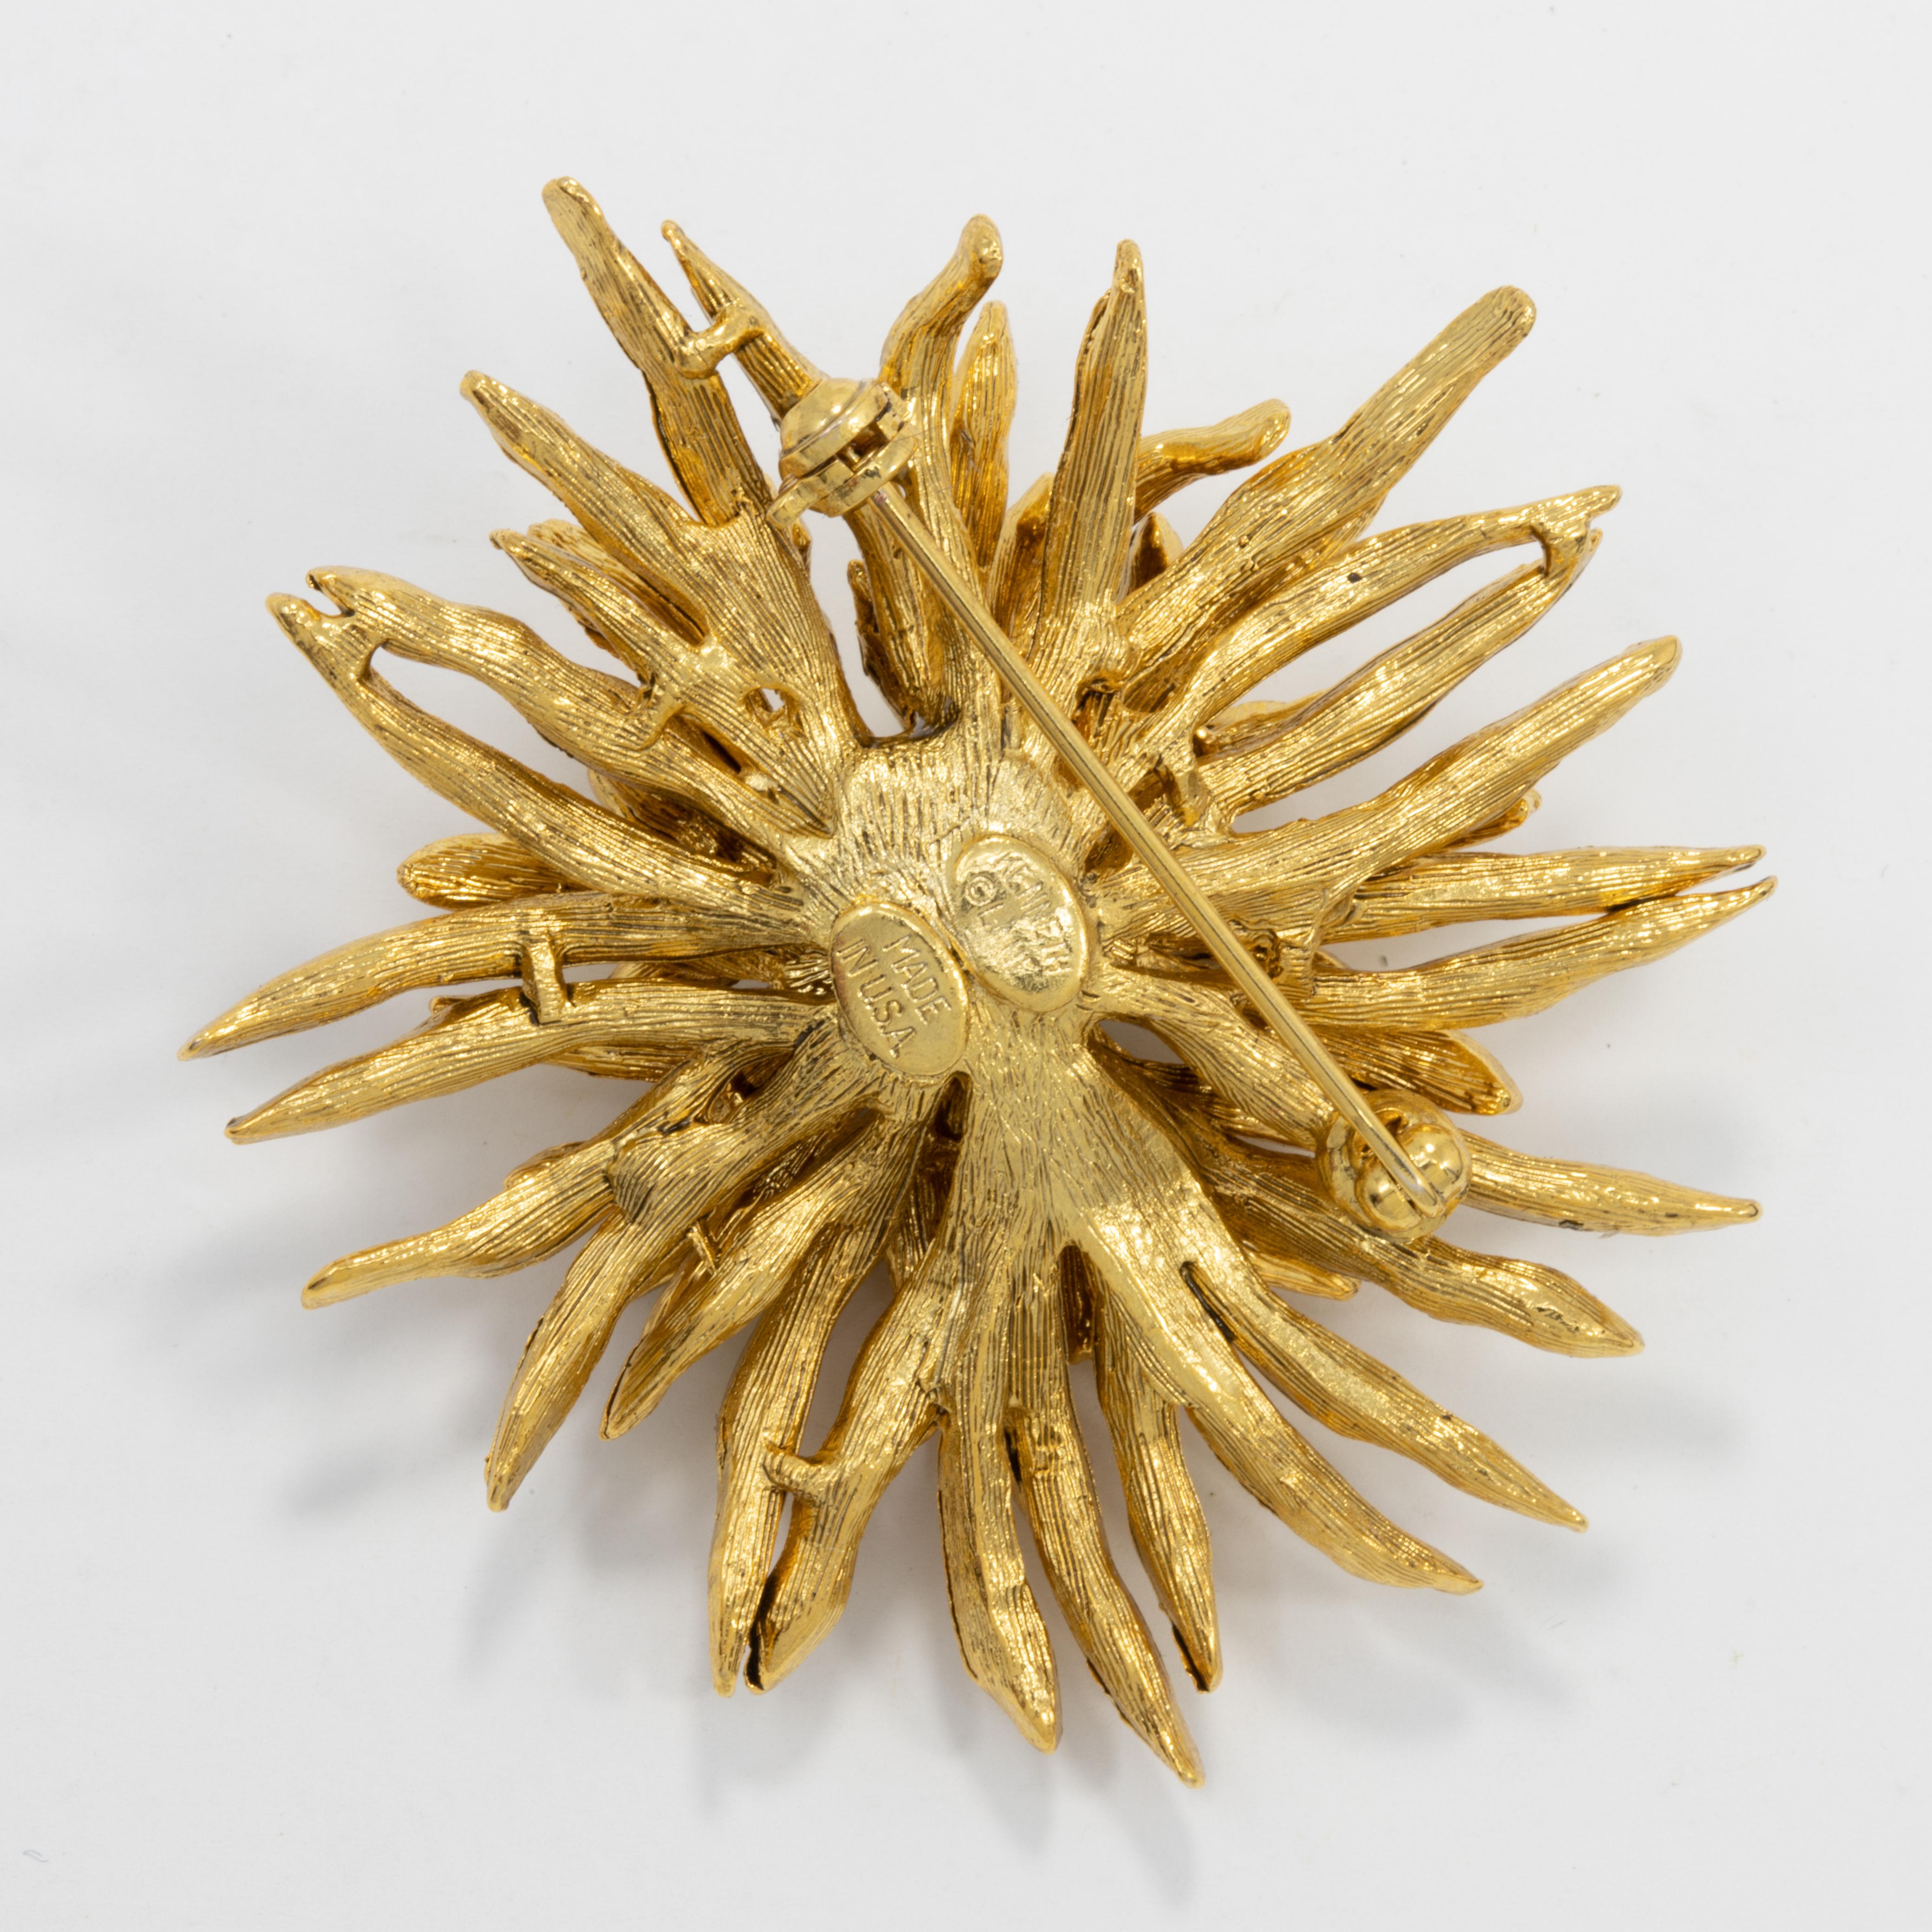 Glamorous golden flower decorated with clear crystals. A stylish pin brooch by Kenneth Jay Lane!

Marks / hallmarks / etc: Kenneth Lane, Made in USA